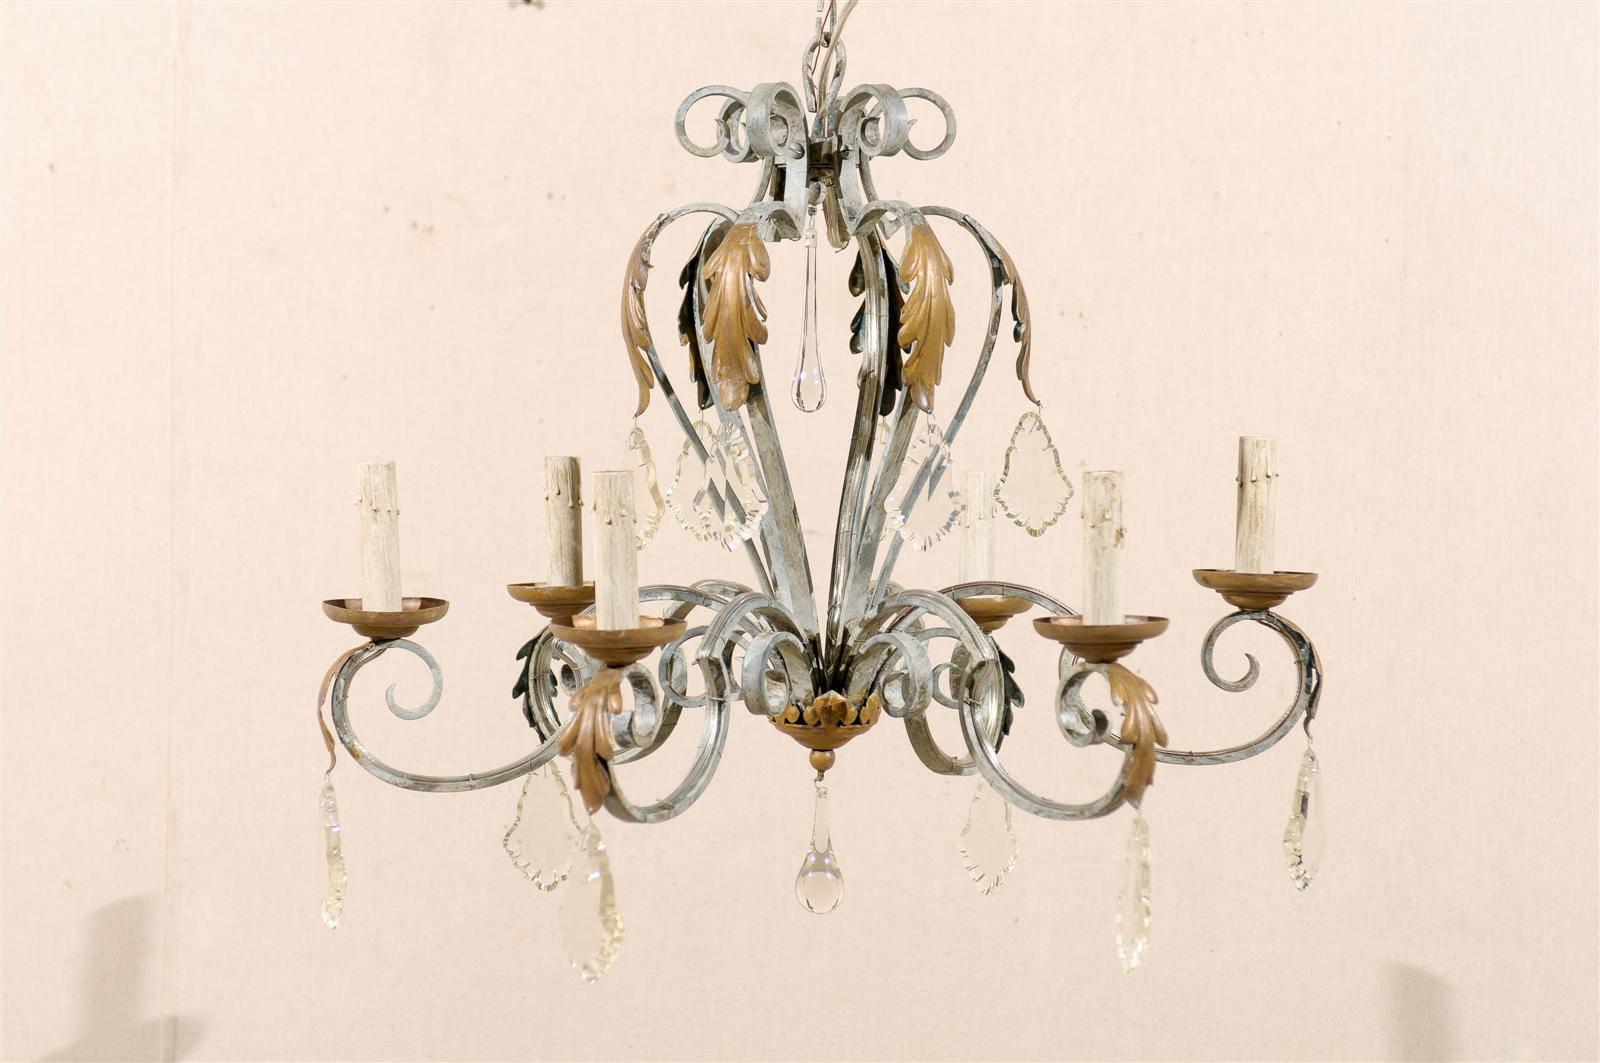 A French vintage six-light painted iron and crystal chandelier with scrolled arms and acanthus leaves from the mid-20th century.

Rewired for the US, this chandelier comes with a complimentary 3 foot chain and canopy painted to match.